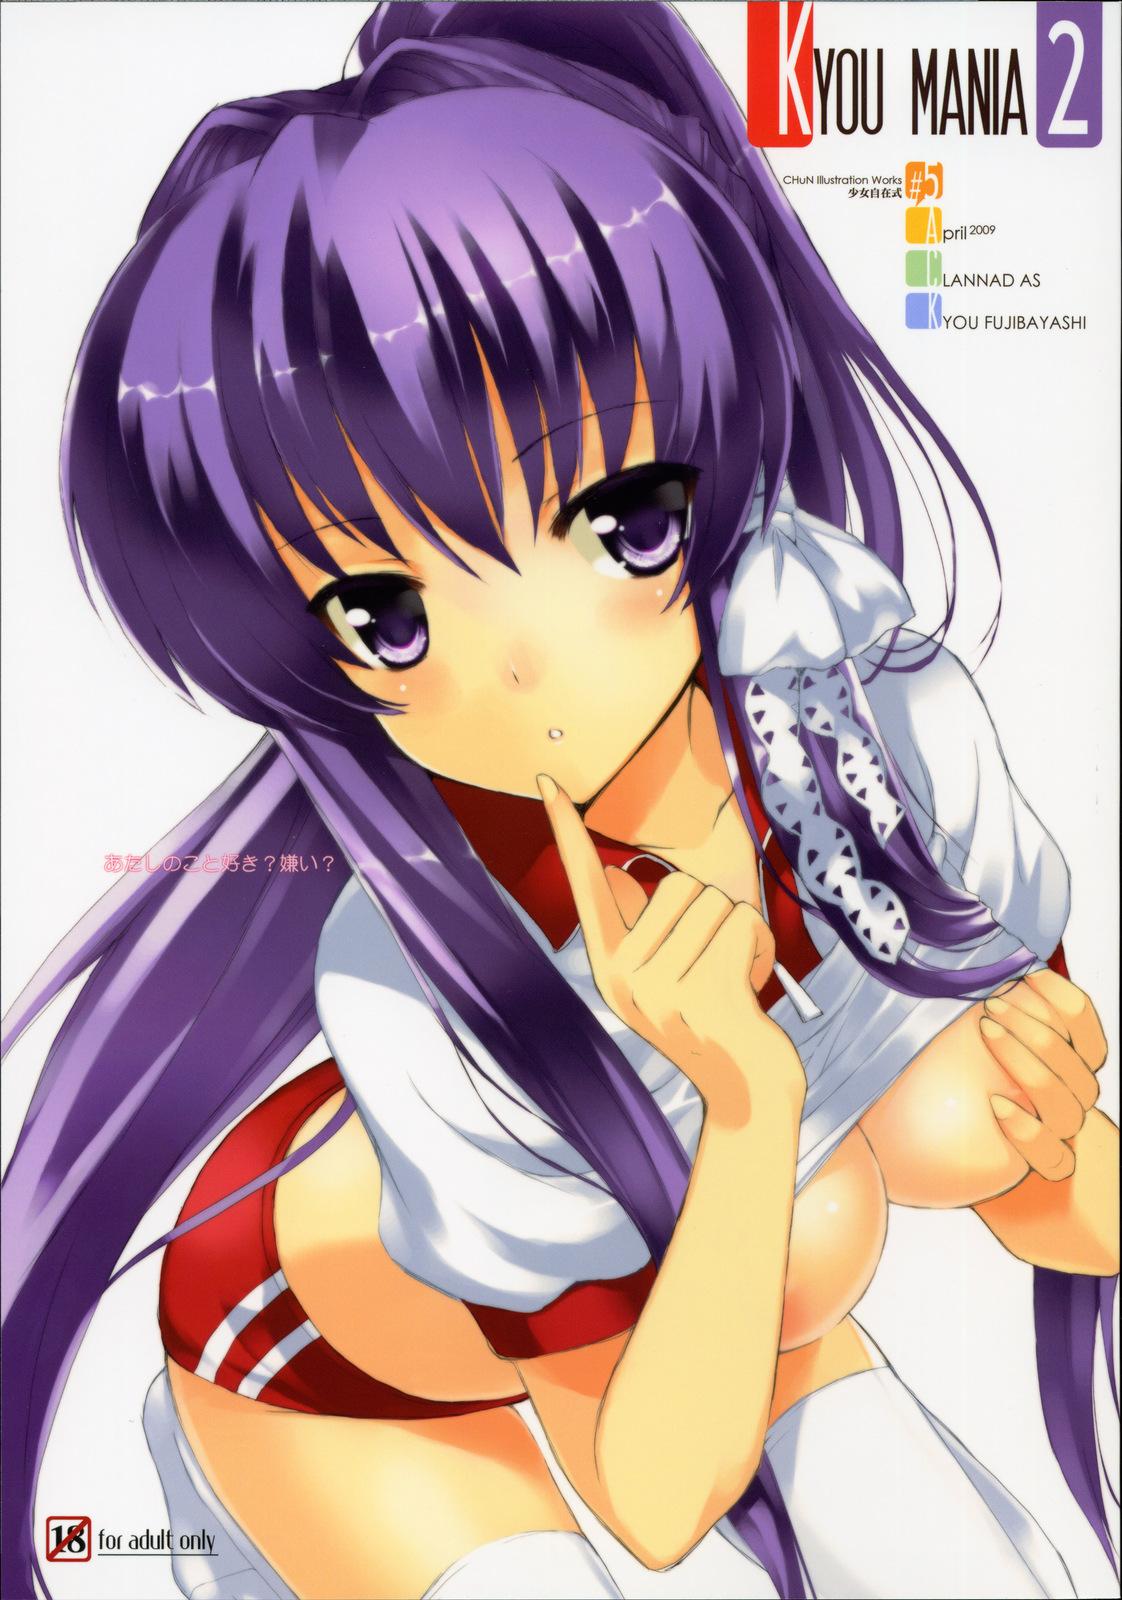 Erotic KYOU MANIA 2 - Clannad Facial - Picture 1